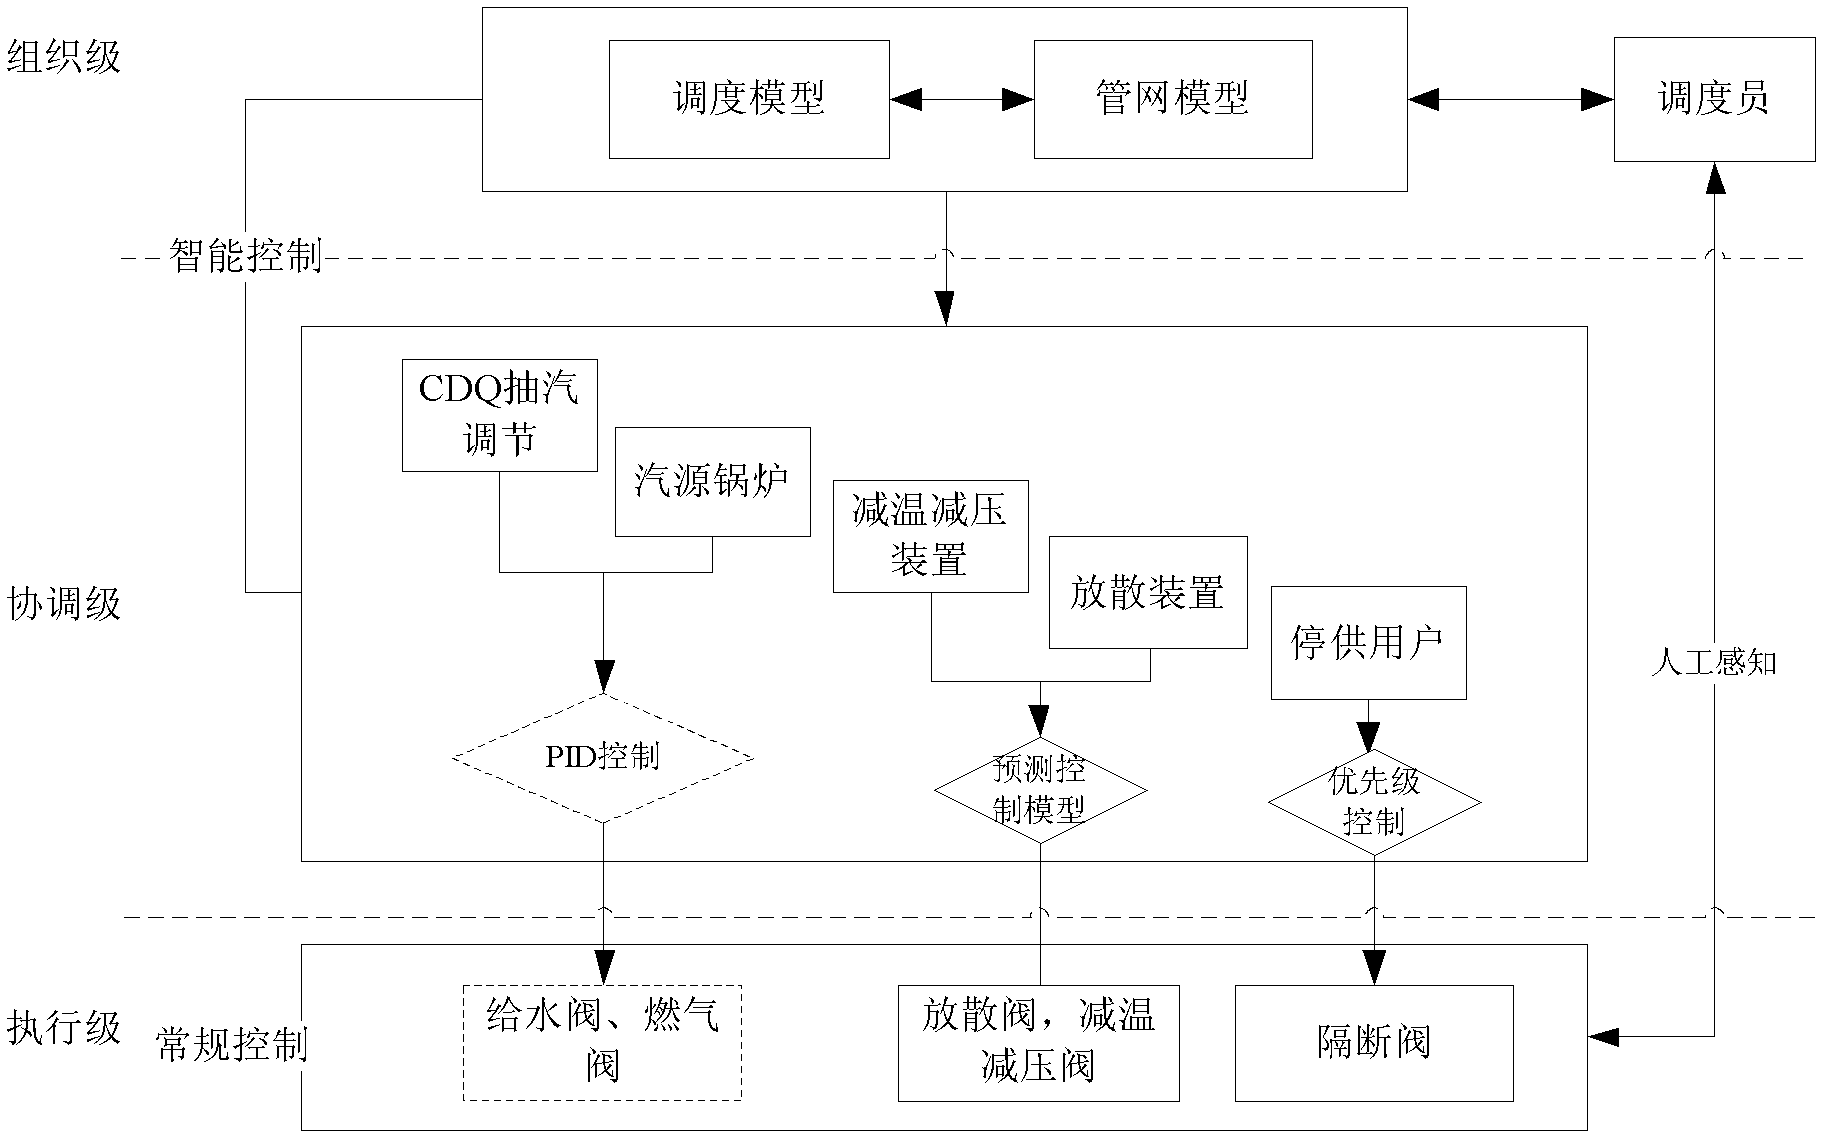 Pressure control system for steel enterprise steam pipe network based on dynamic matrix control